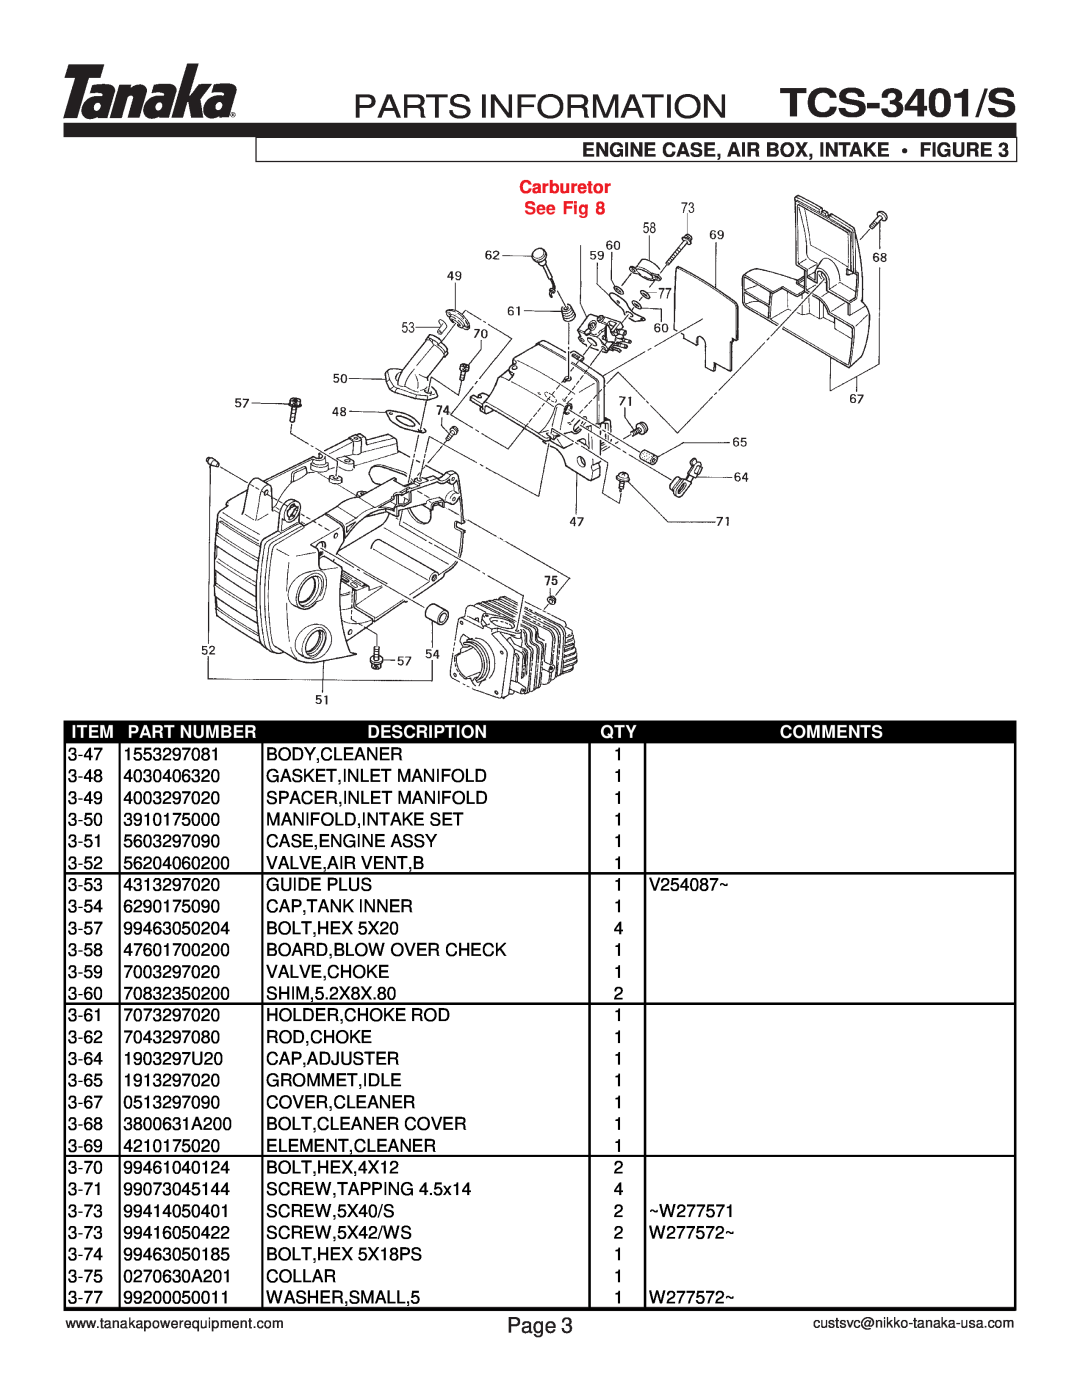 Tanaka manual Engine Case, Air Box, Intake Figure, PARTS INFORMATION TCS-3401/S, Page, Carburetor See Fig, Part Number 